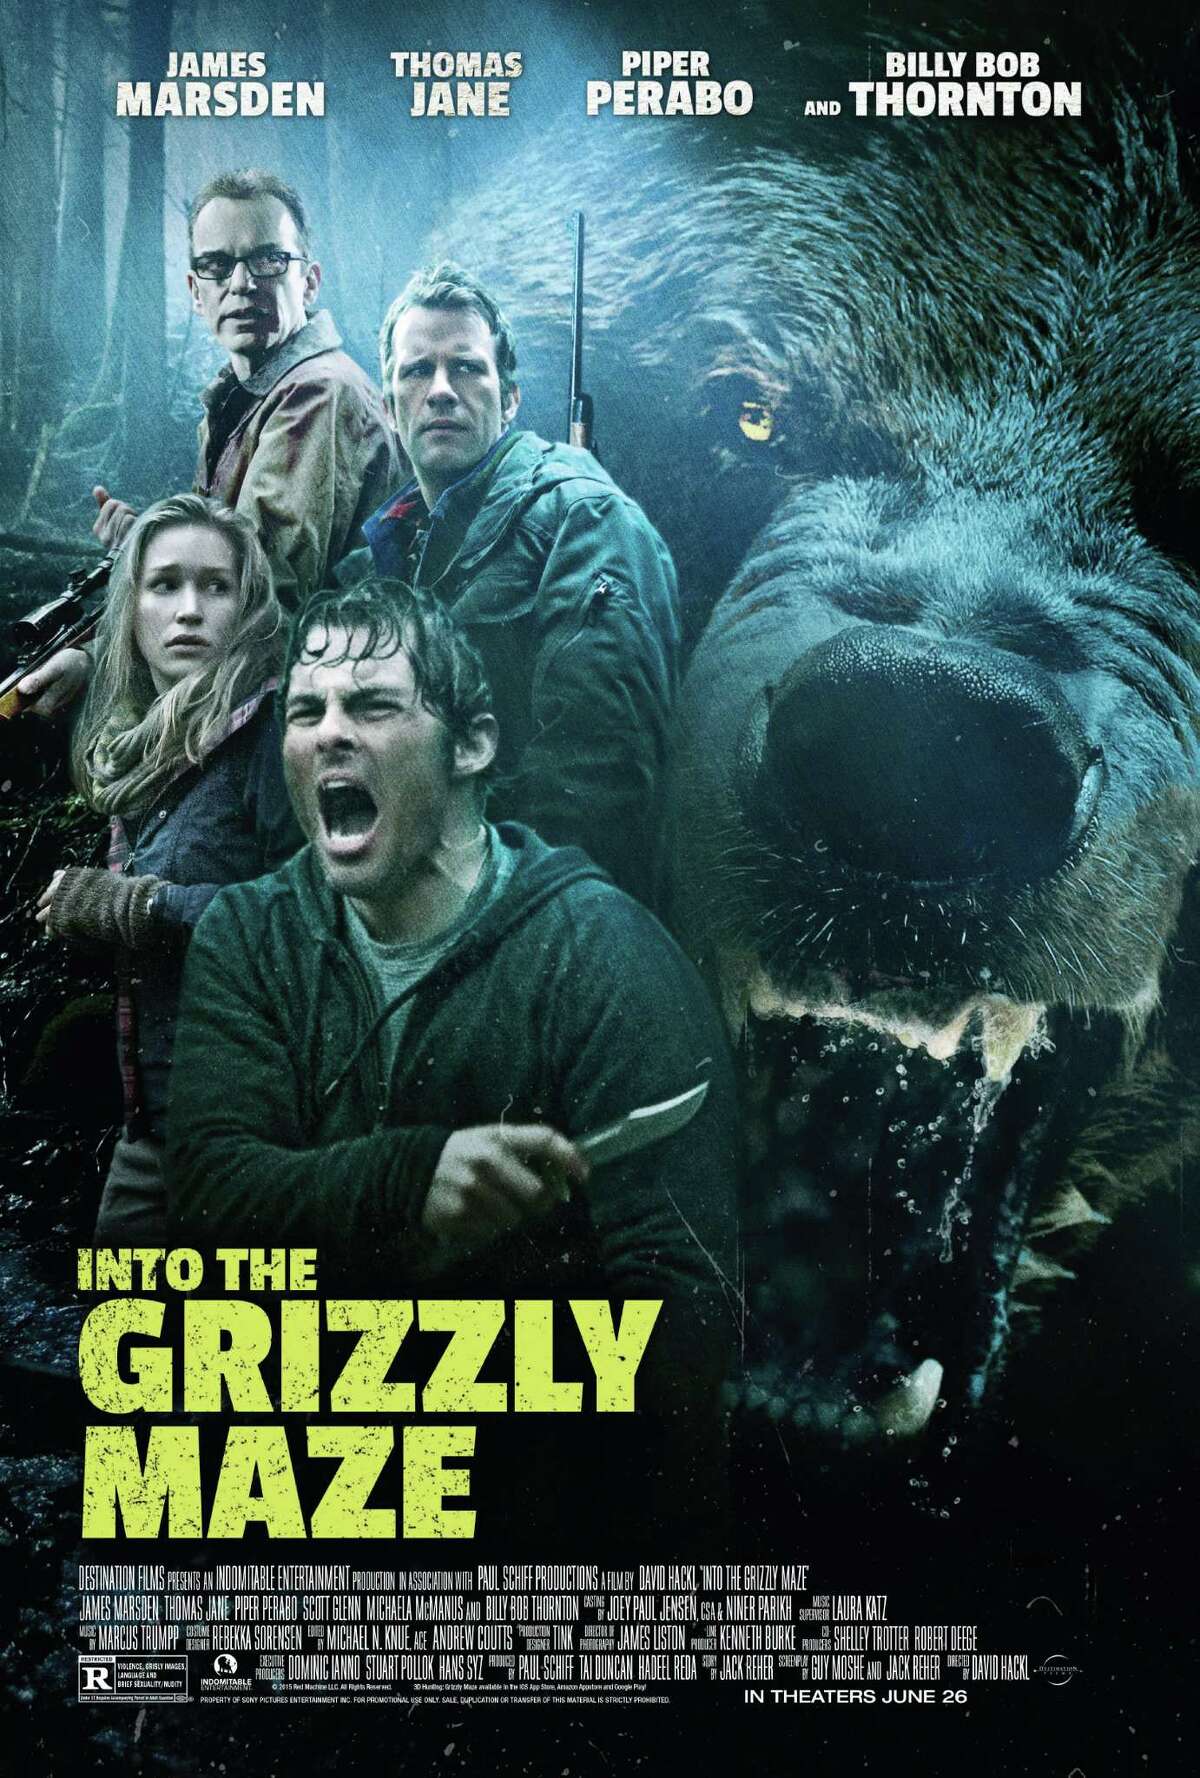 “Into the Grizzly Maze” is rated R for, among other things, grisly violence, which is a good description of what happens to Billy Bob Thornton’s face. Yeesh.